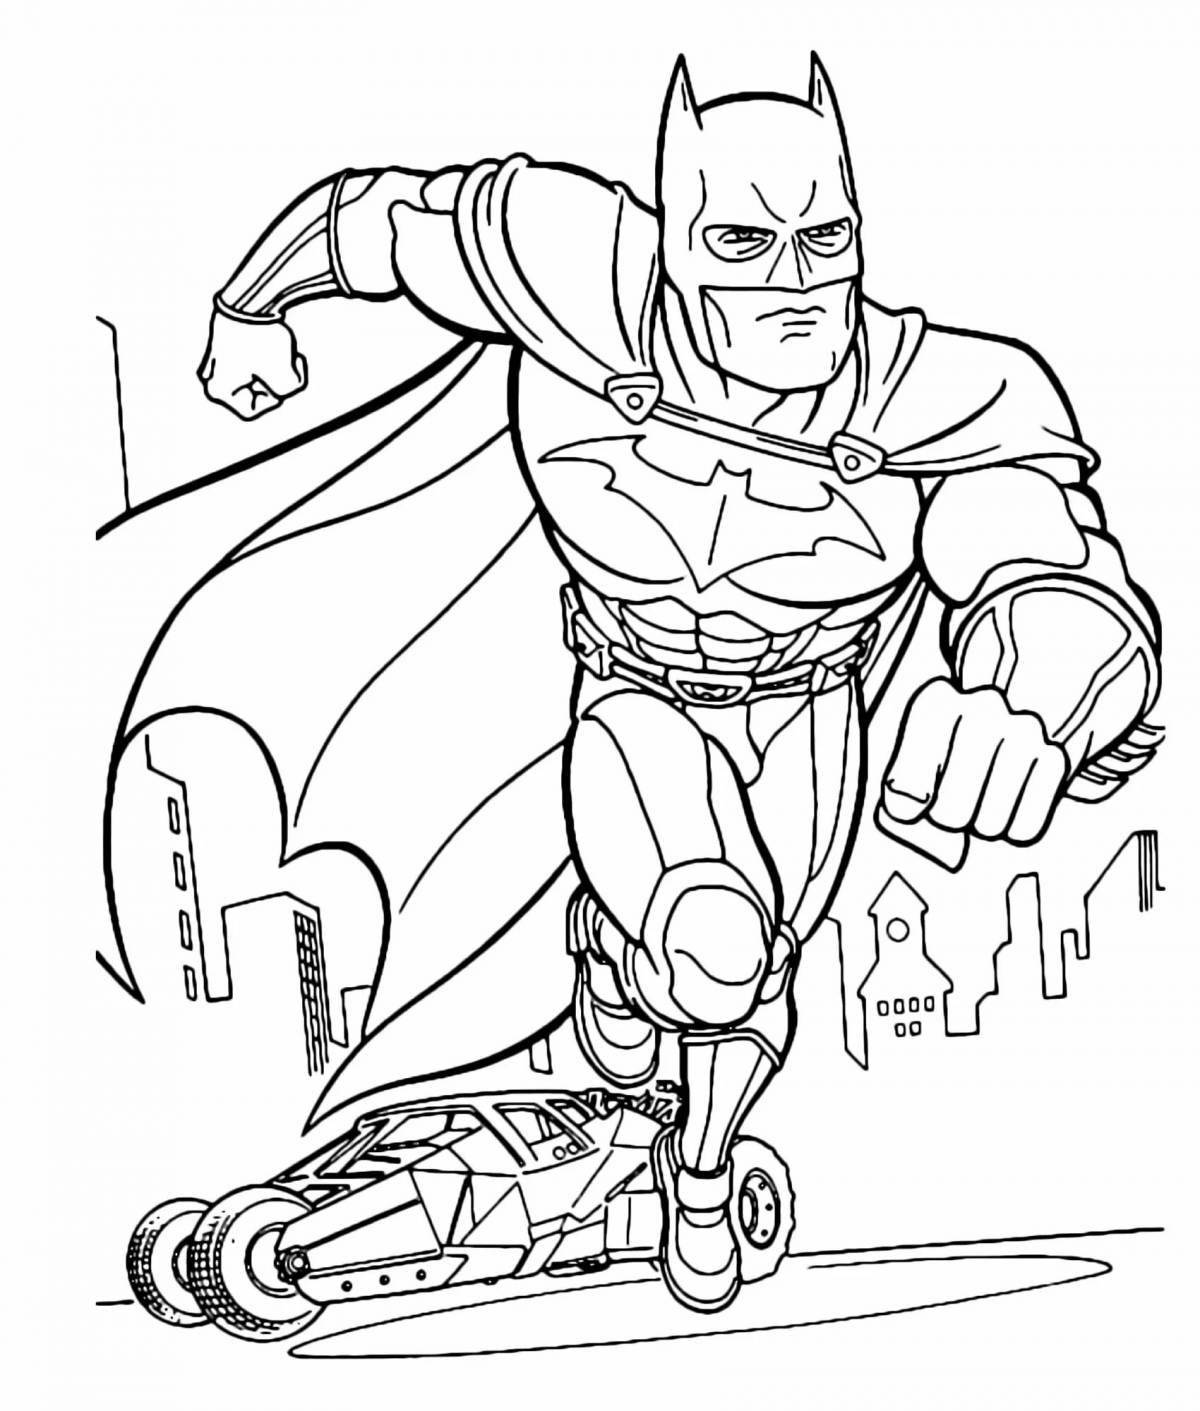 Playful superhero coloring page for 6-7 year olds